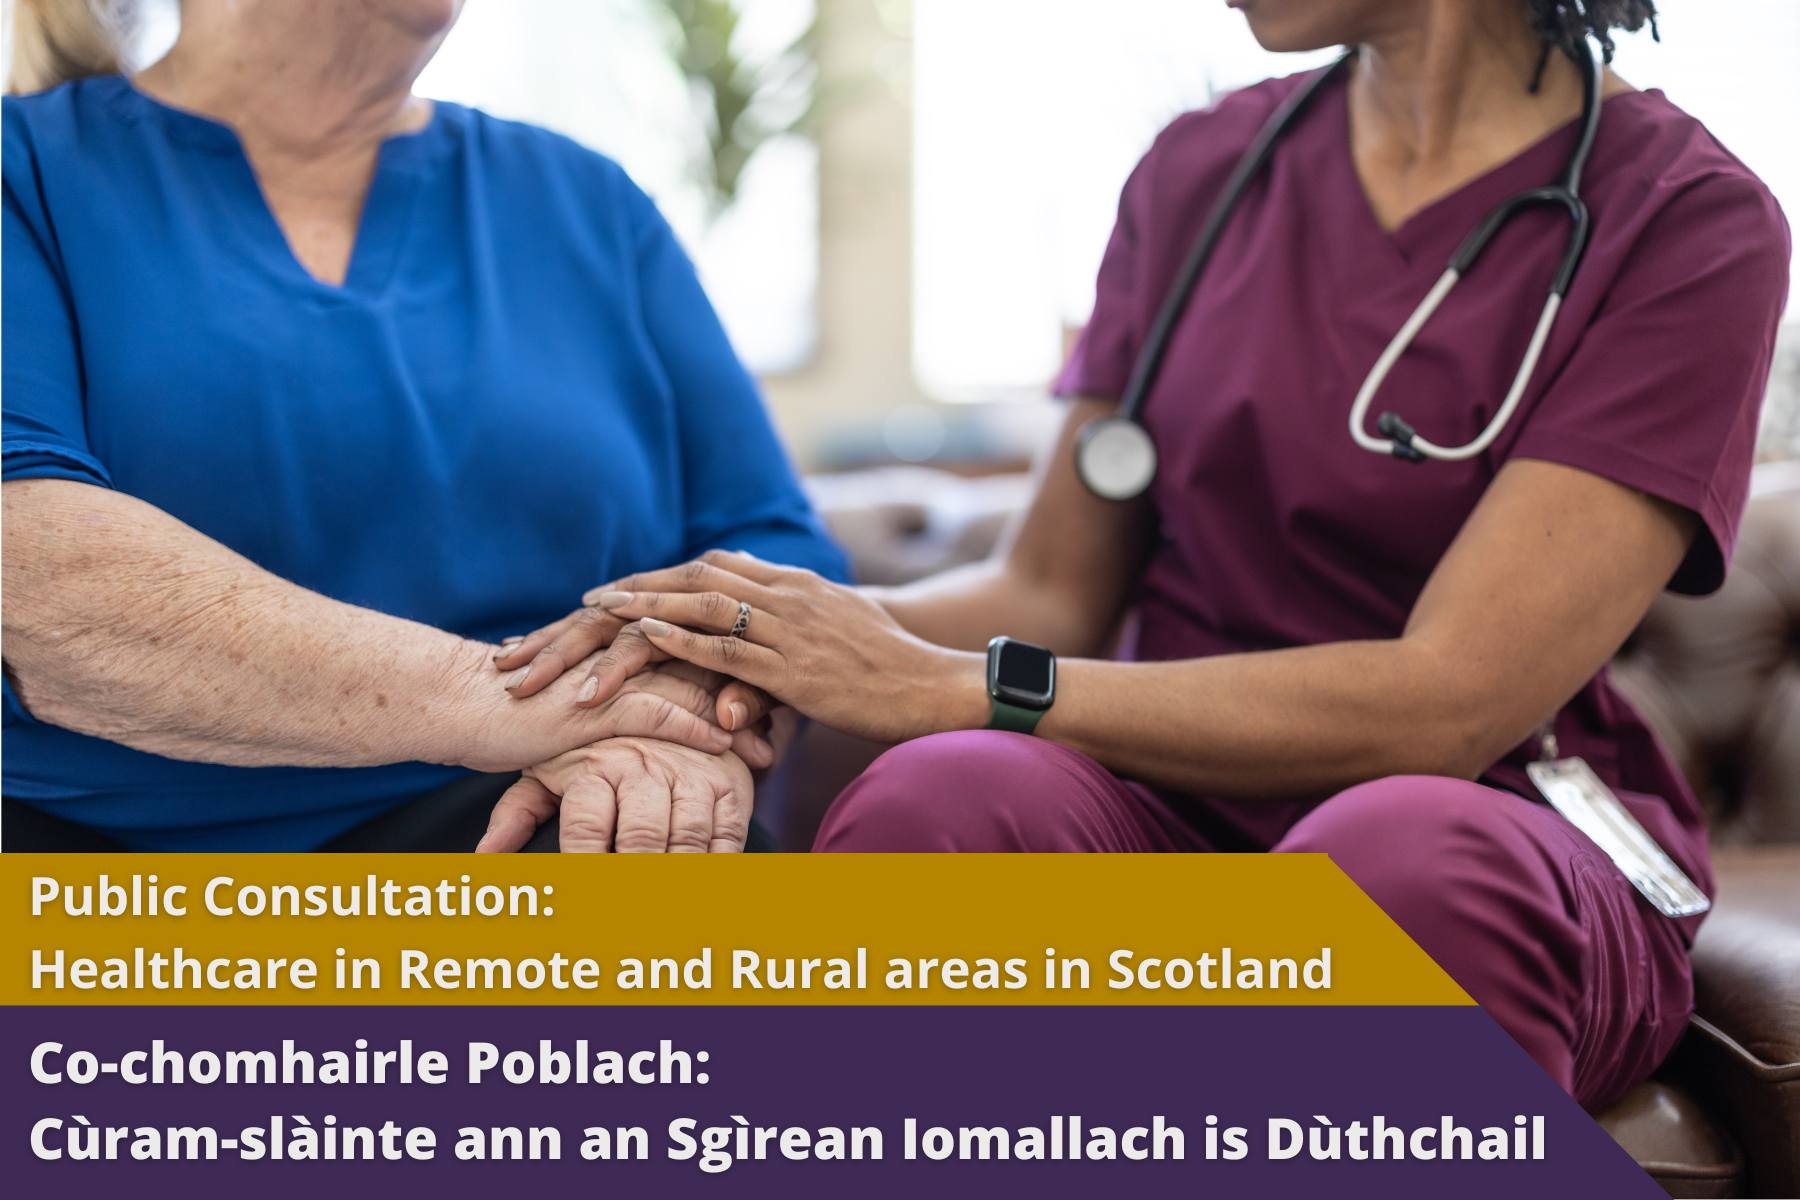 Picture: A femal nurse comforting an older female patient. Text reads 'Public Consulteation: Healthcare in Remote and Rural Areas in Scotland'